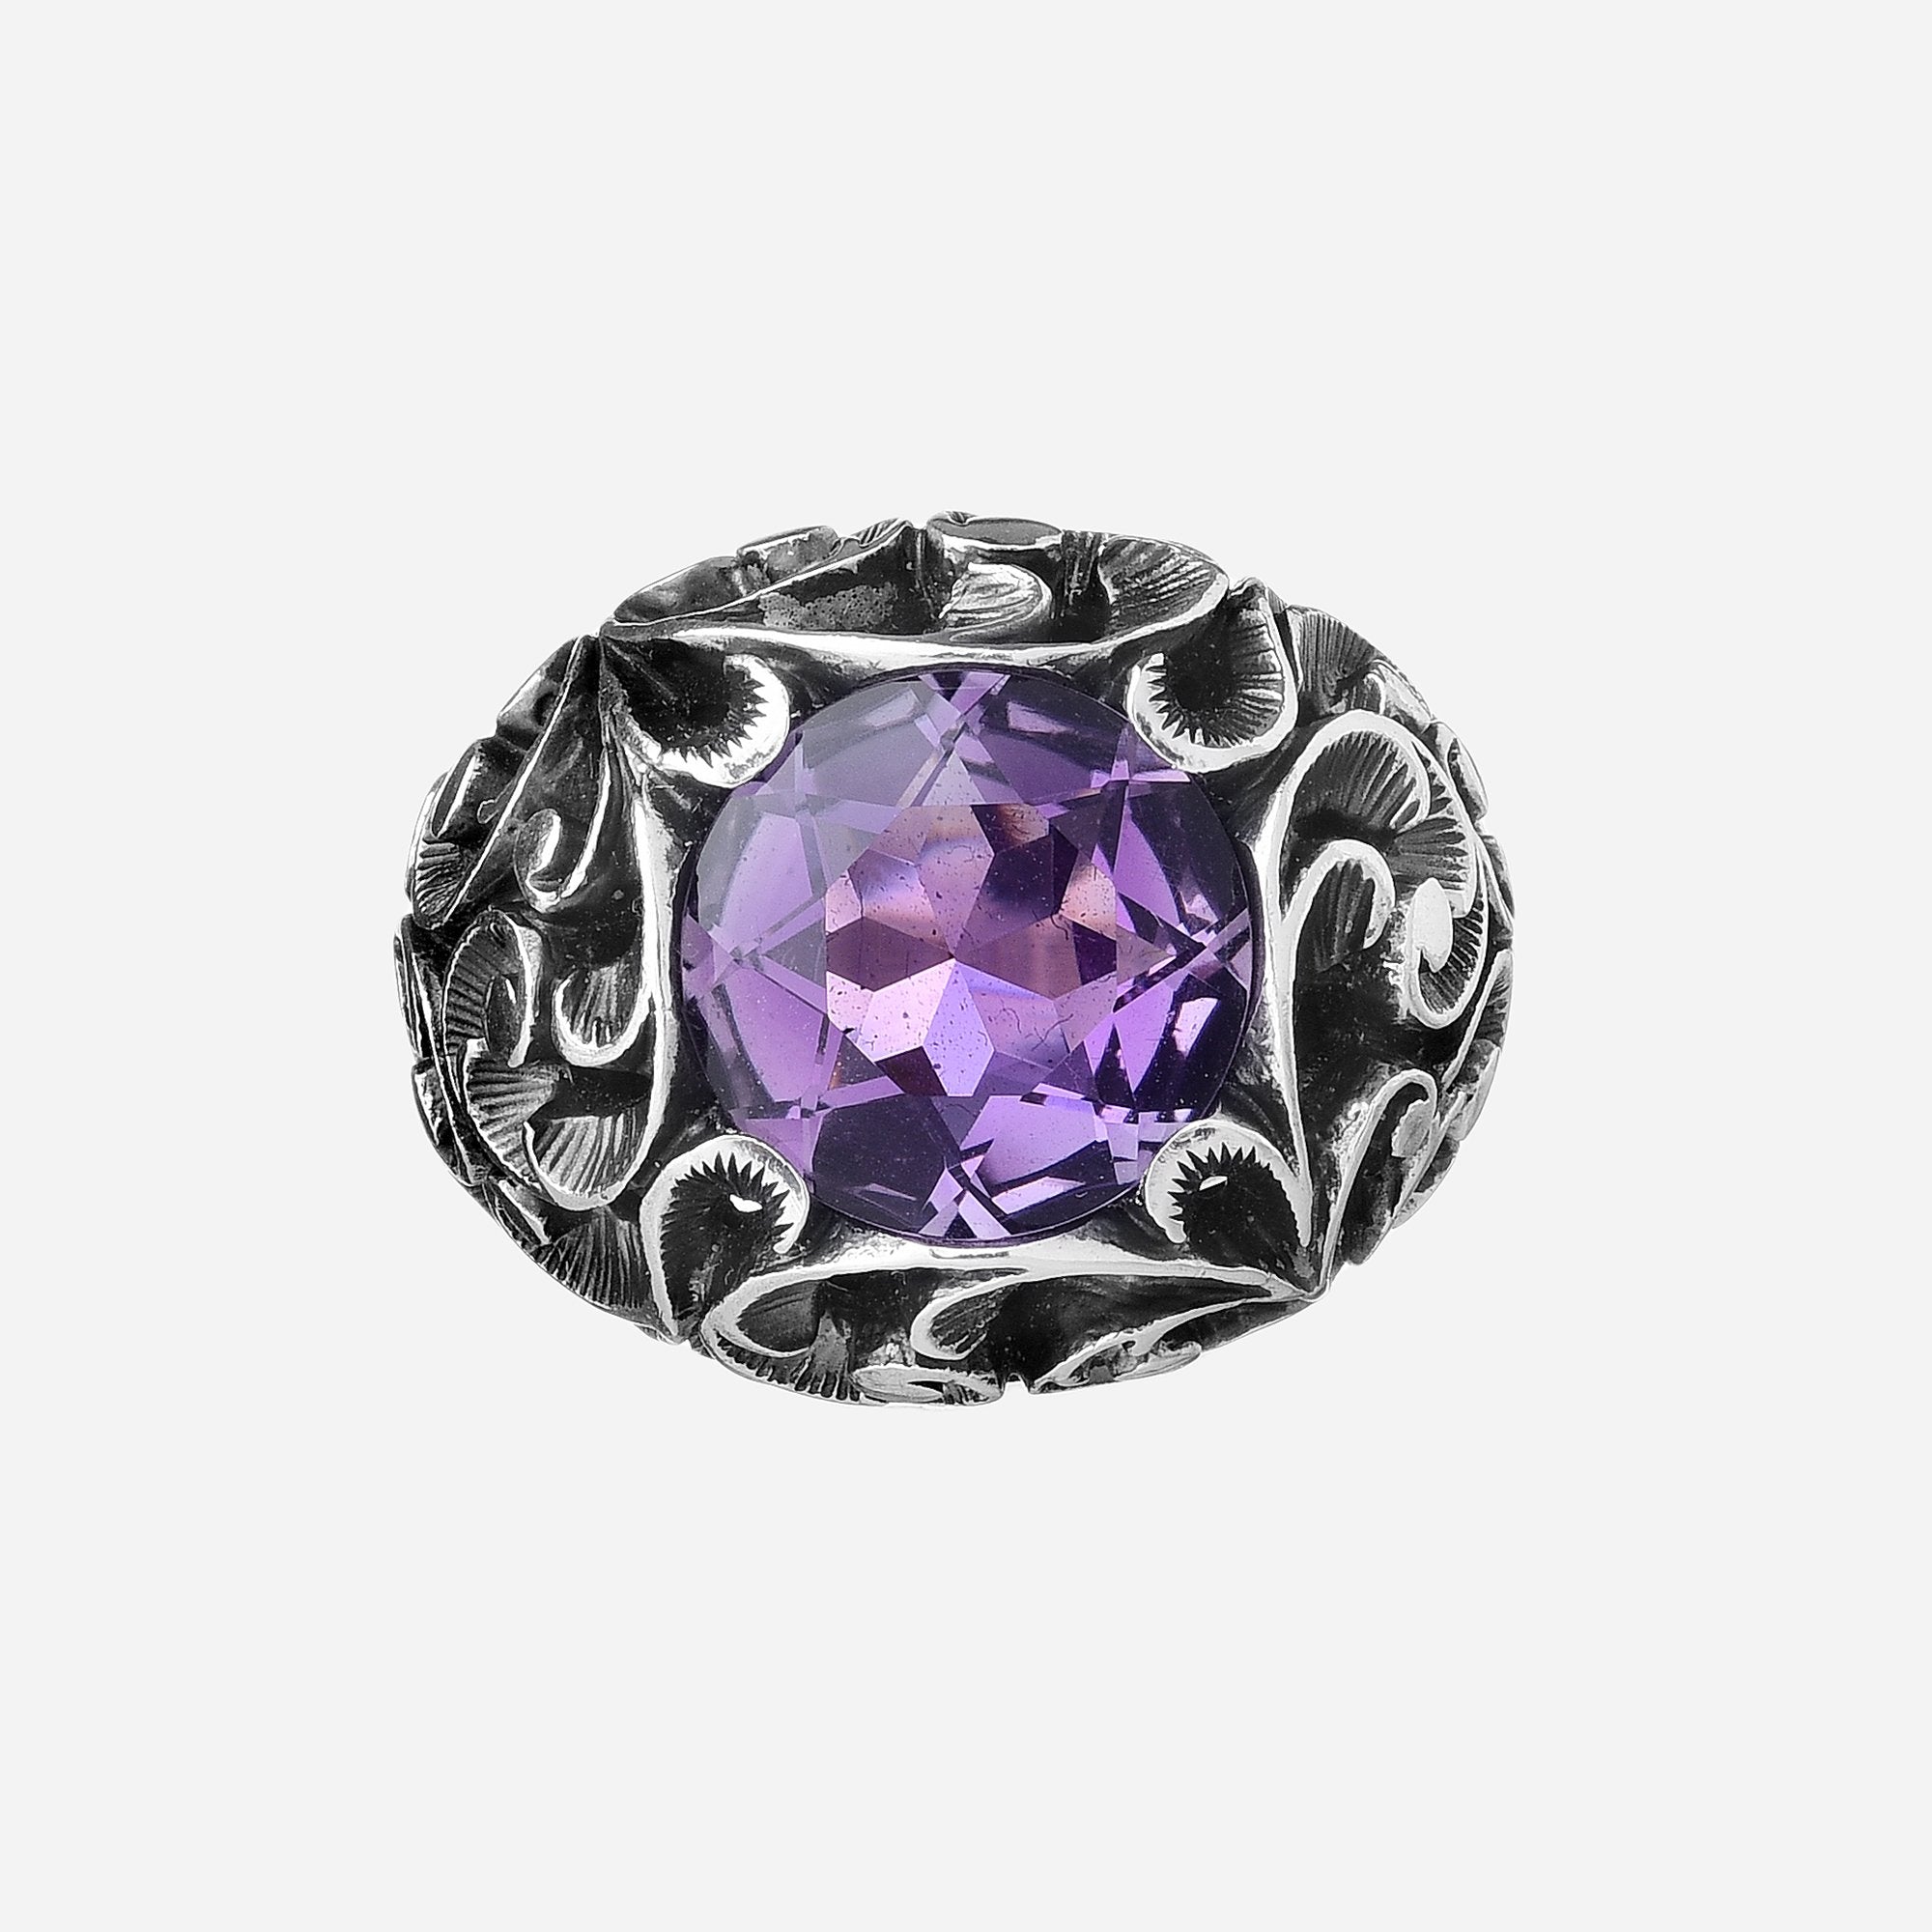 Ring with faceted round cut stone